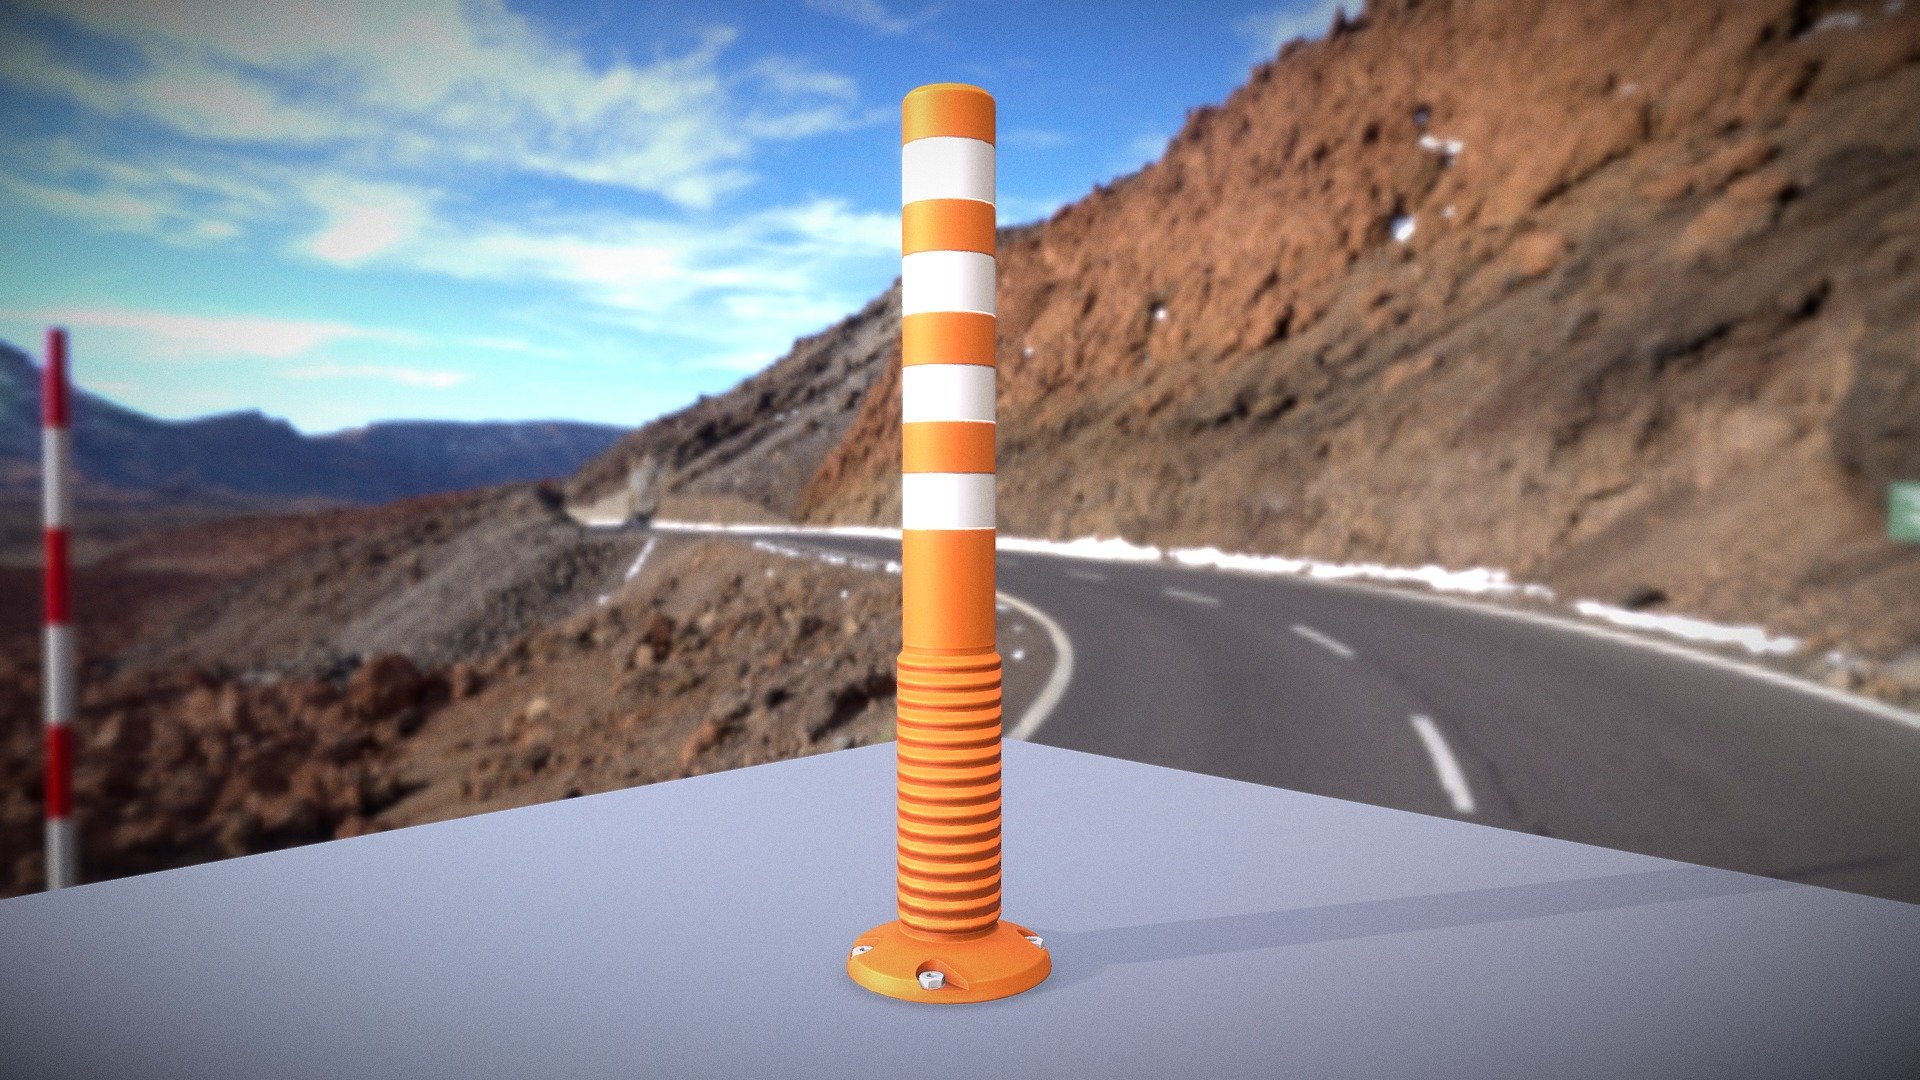 Here is the 1000mm version of an low-poly traffic delineator from Germany.

Maybe interesting for city planning or video games.



Available Textures:

-Diffuse map
-Normal map



Available formats:

Collada (.dae)

DirectX (.X)

X3D (.x3d)

Autodesk FBX (.fbx)

Alias/WaveFront Material (.mtl)

OBJ (.obj)

Blender (.blend)

3D Studio (.3ds)

DXF (.dxf)

Agisoft Photoscan (.ply)

Stereolithography (.stl)

VRML (.wrl, .wrz)


 - Traffic Delineator Flexipoller (1000mm) low-poly - Buy Royalty Free 3D model by VIS-All-3D (@VIS-All) 3d model